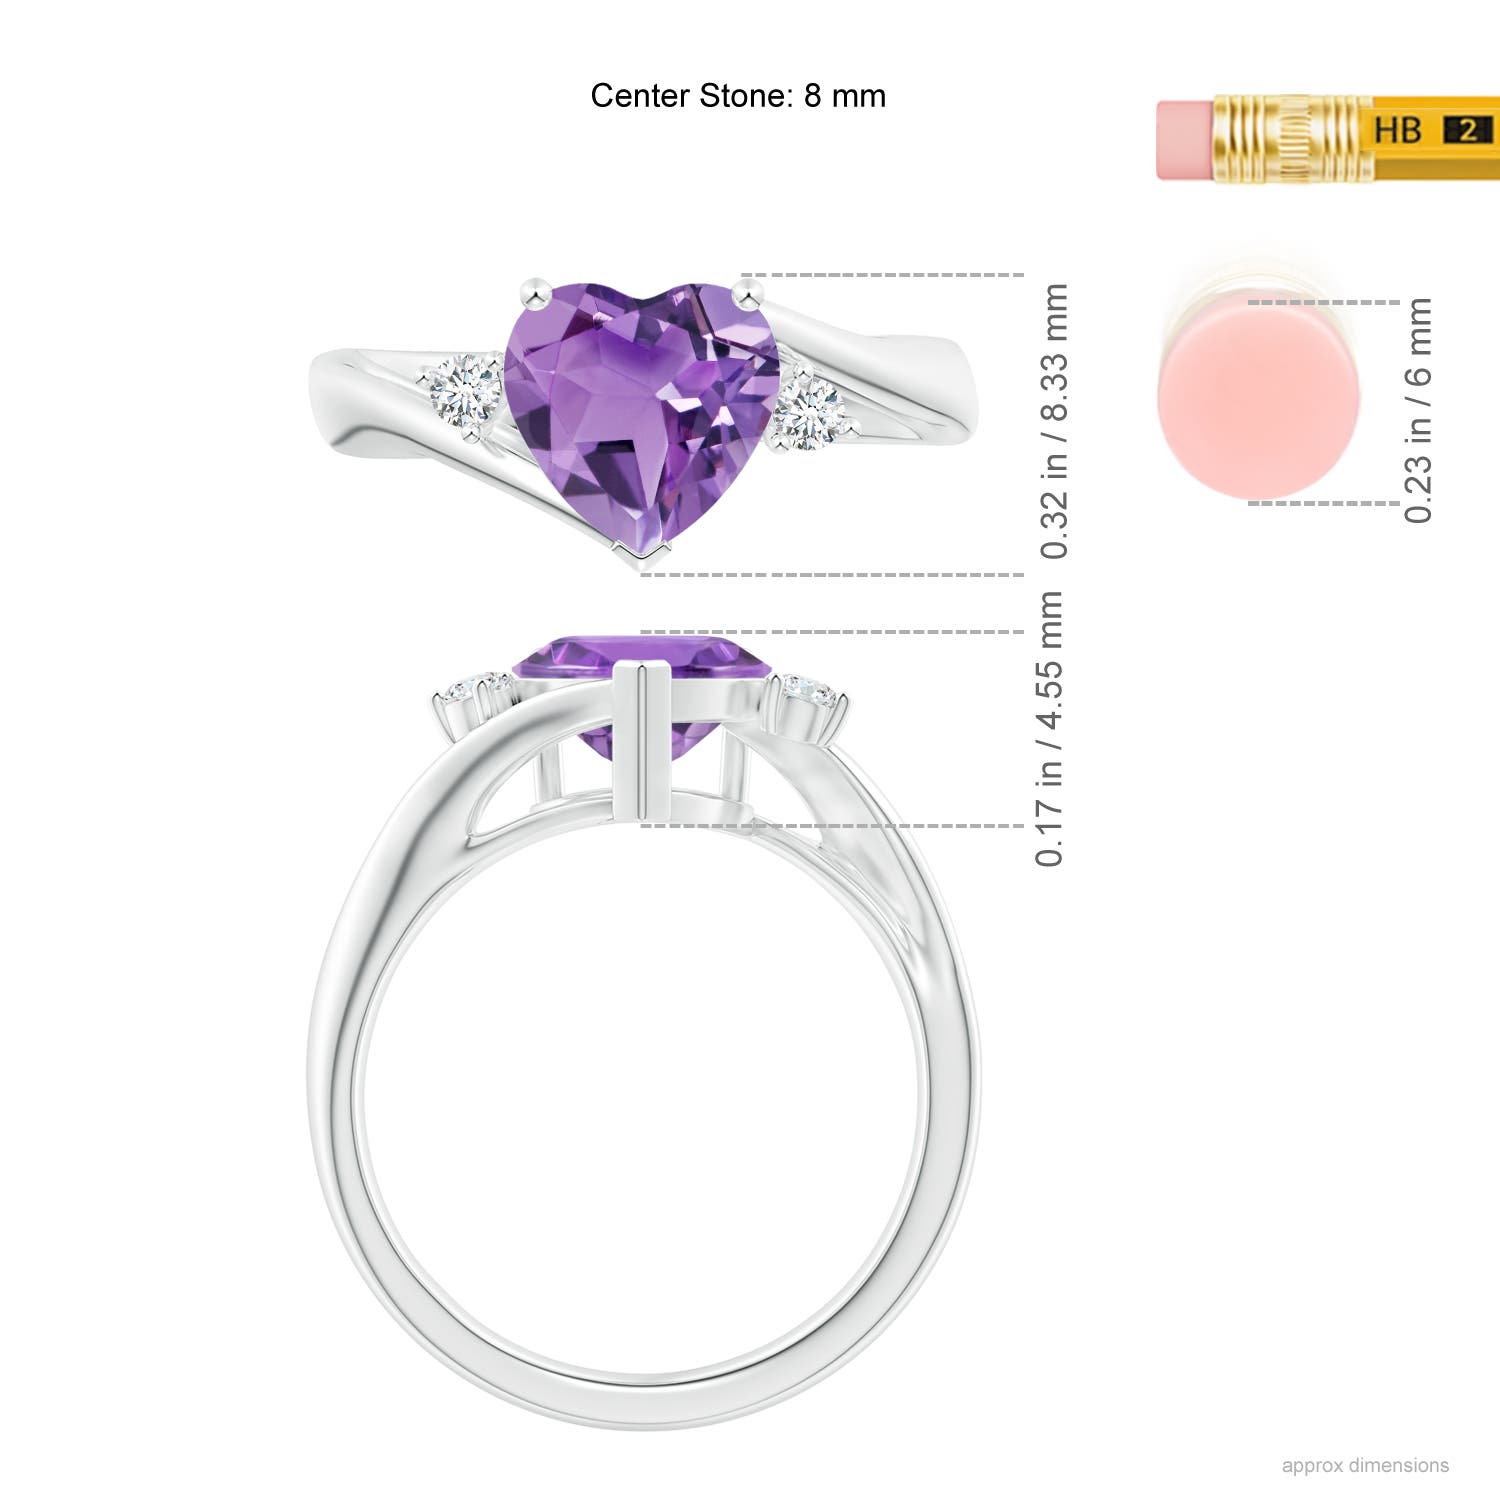 A - Amethyst / 1.59 CT / 14 KT White Gold